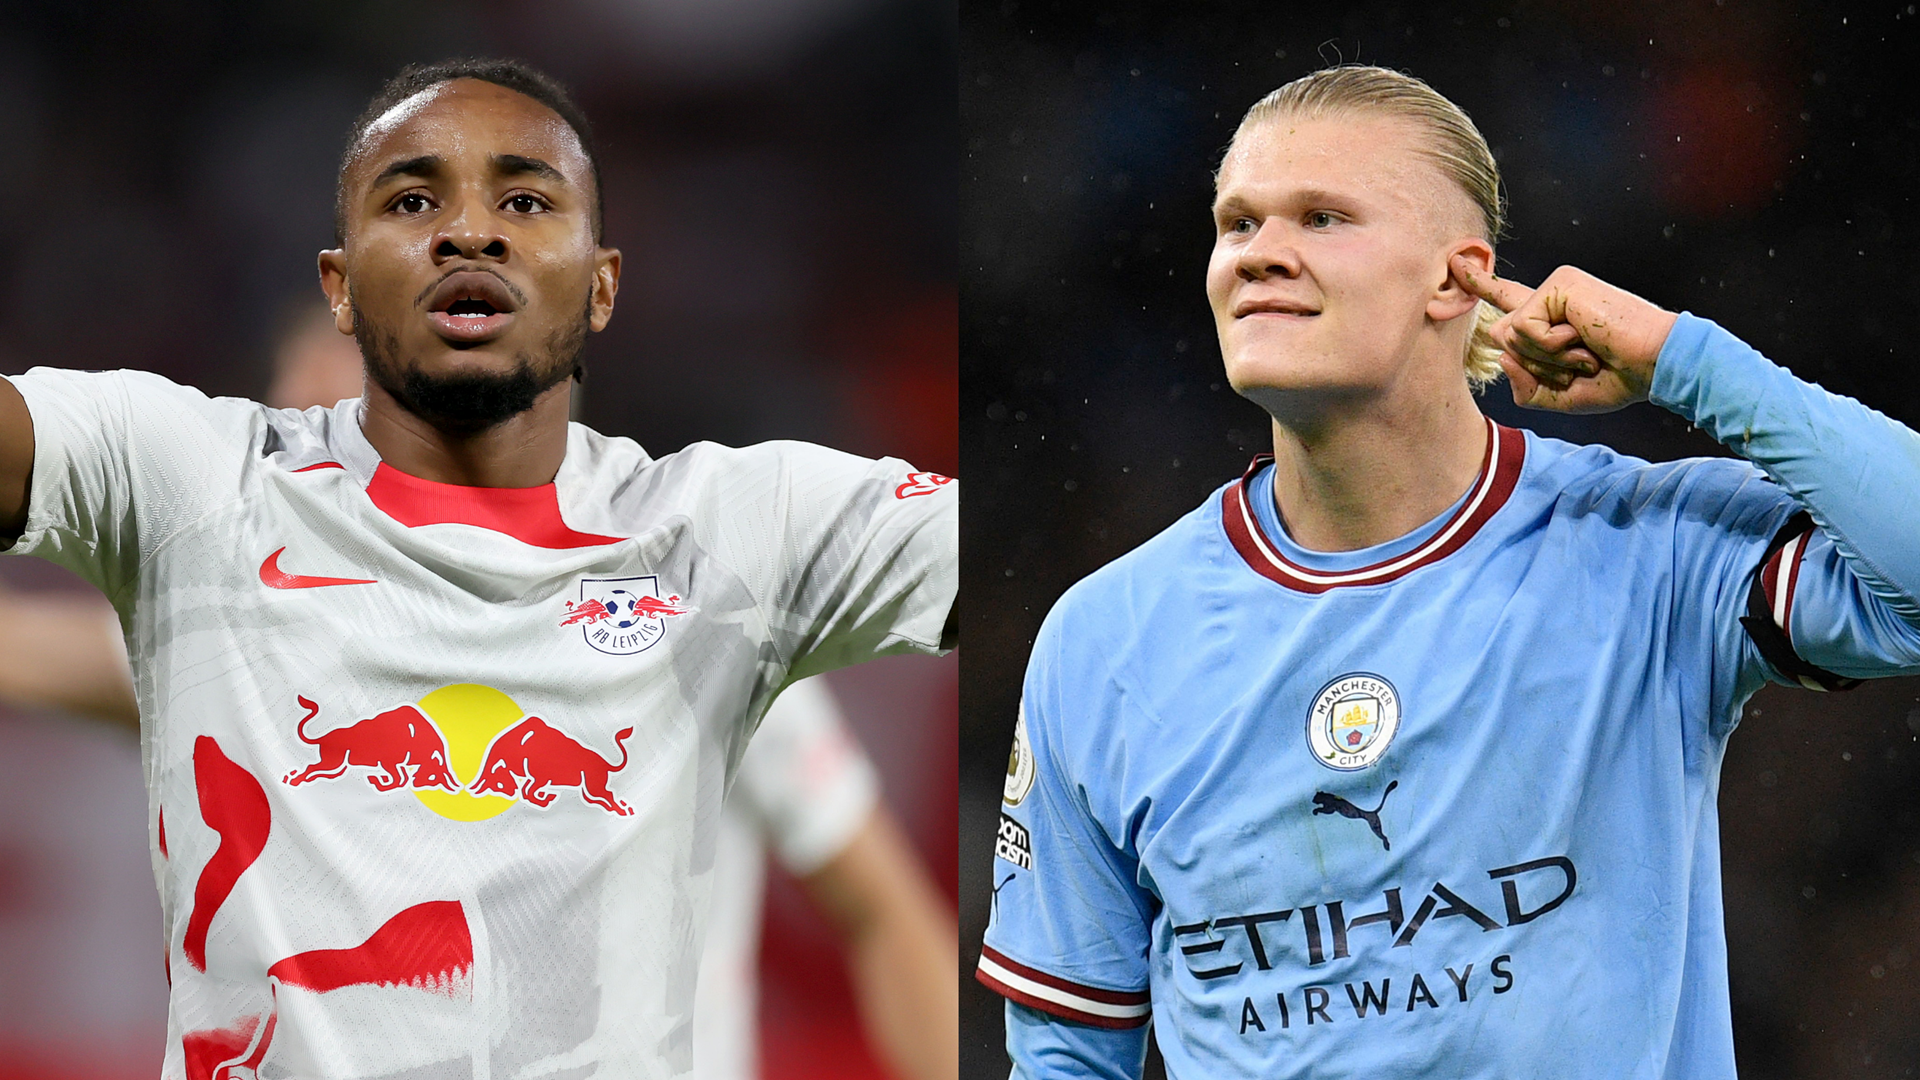 RB Leipzig vs Manchester City UEFA Champions League Round of 16